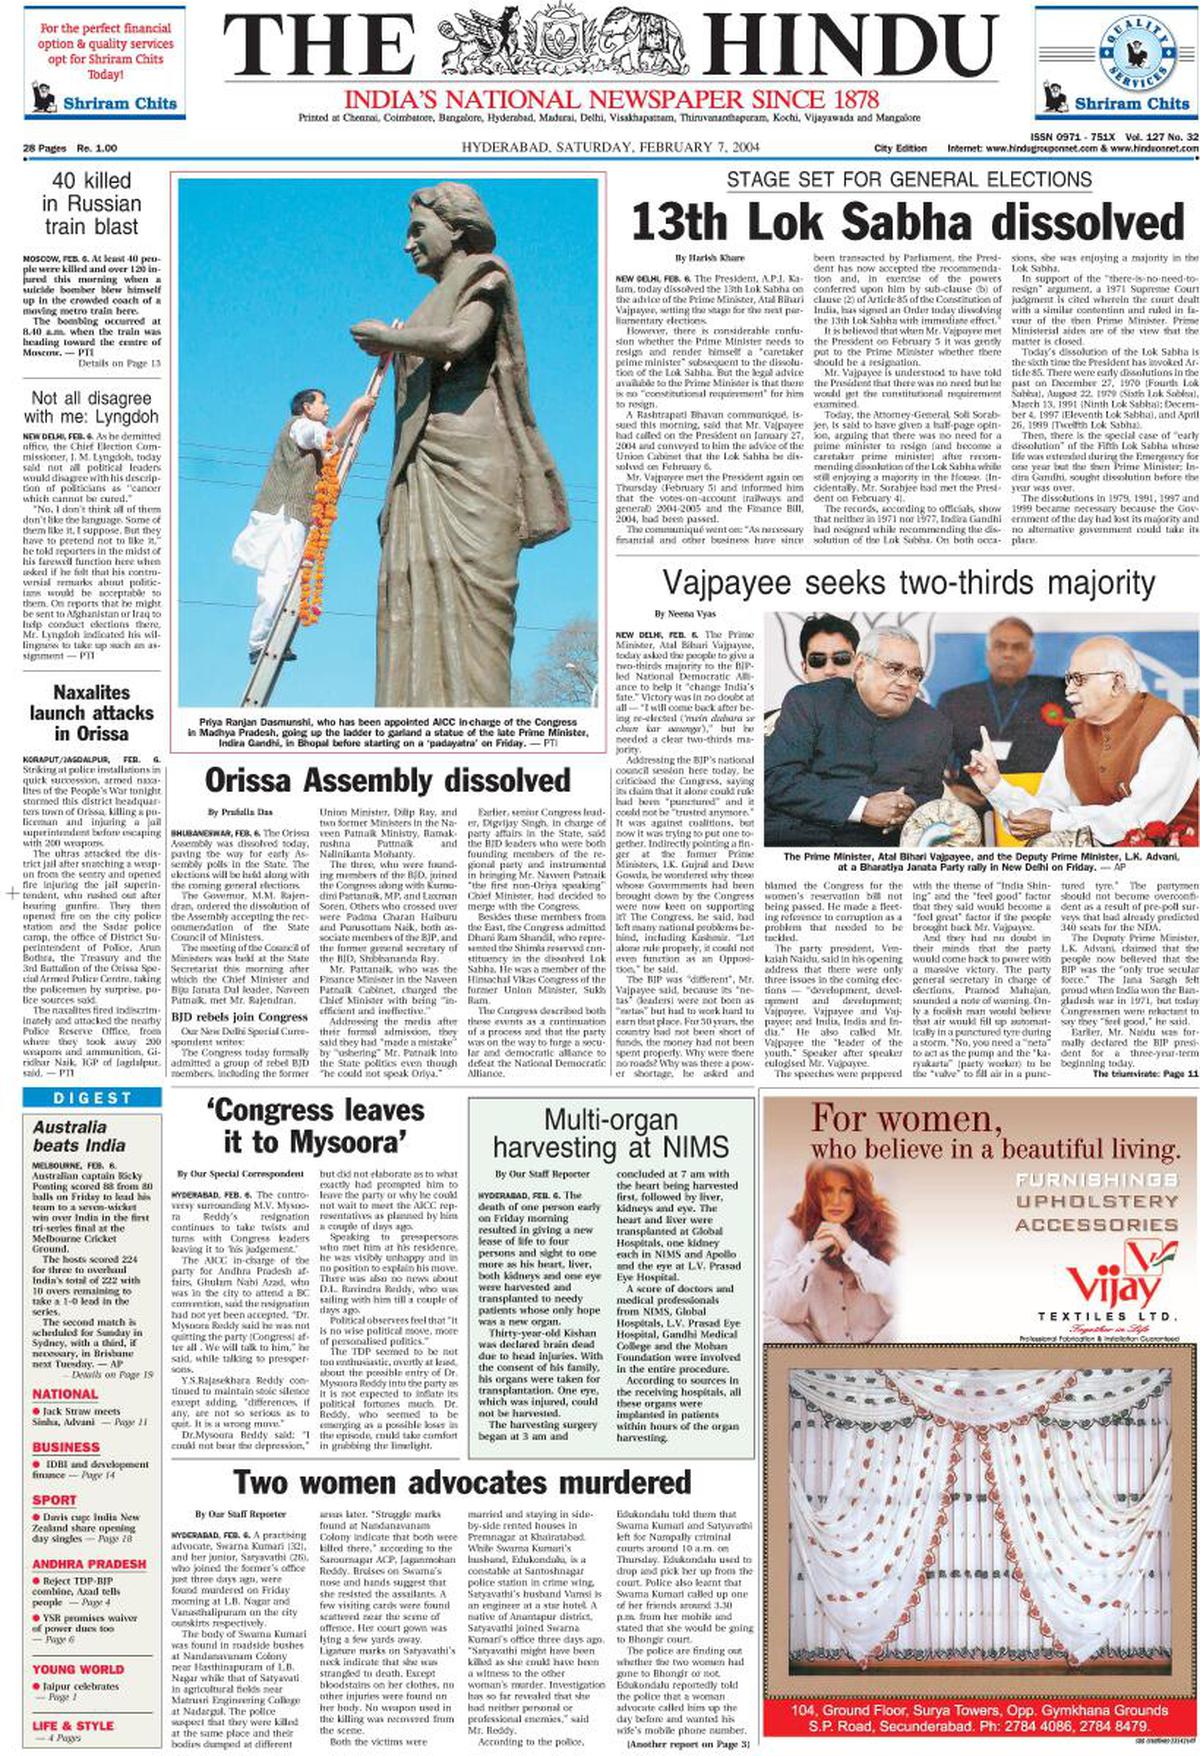 The Hindu’s front page on February 7, 2004.